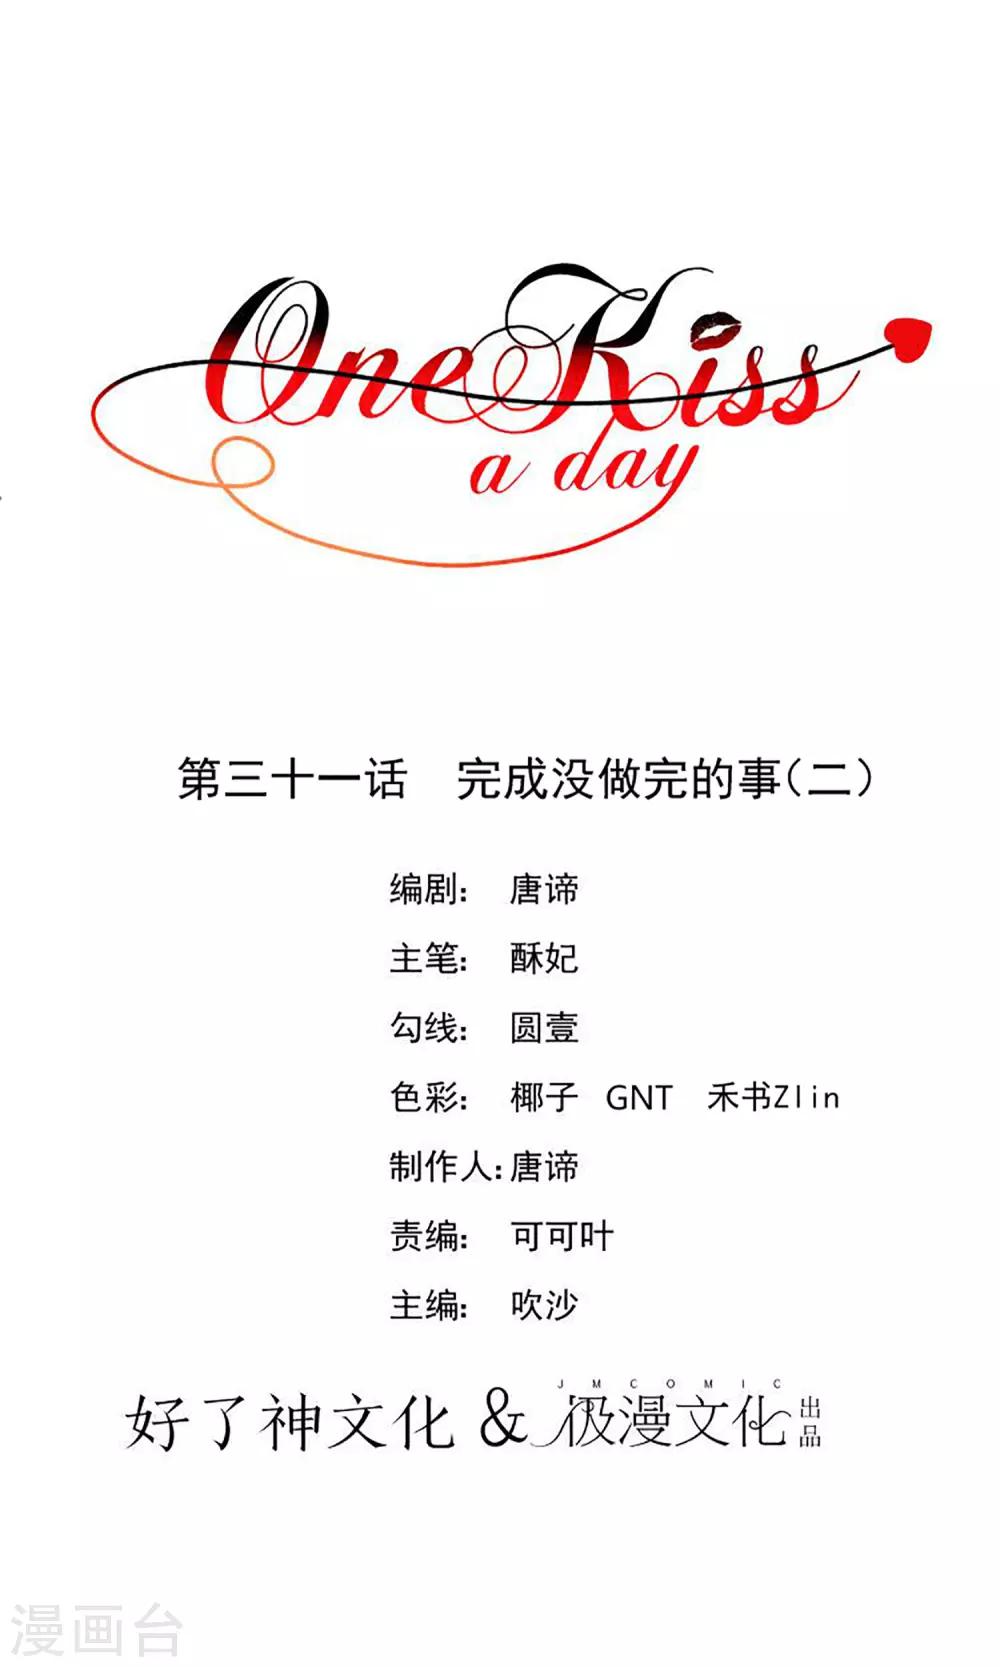 One Kiss A Day - 第31话 完成没做完的事2 - 1